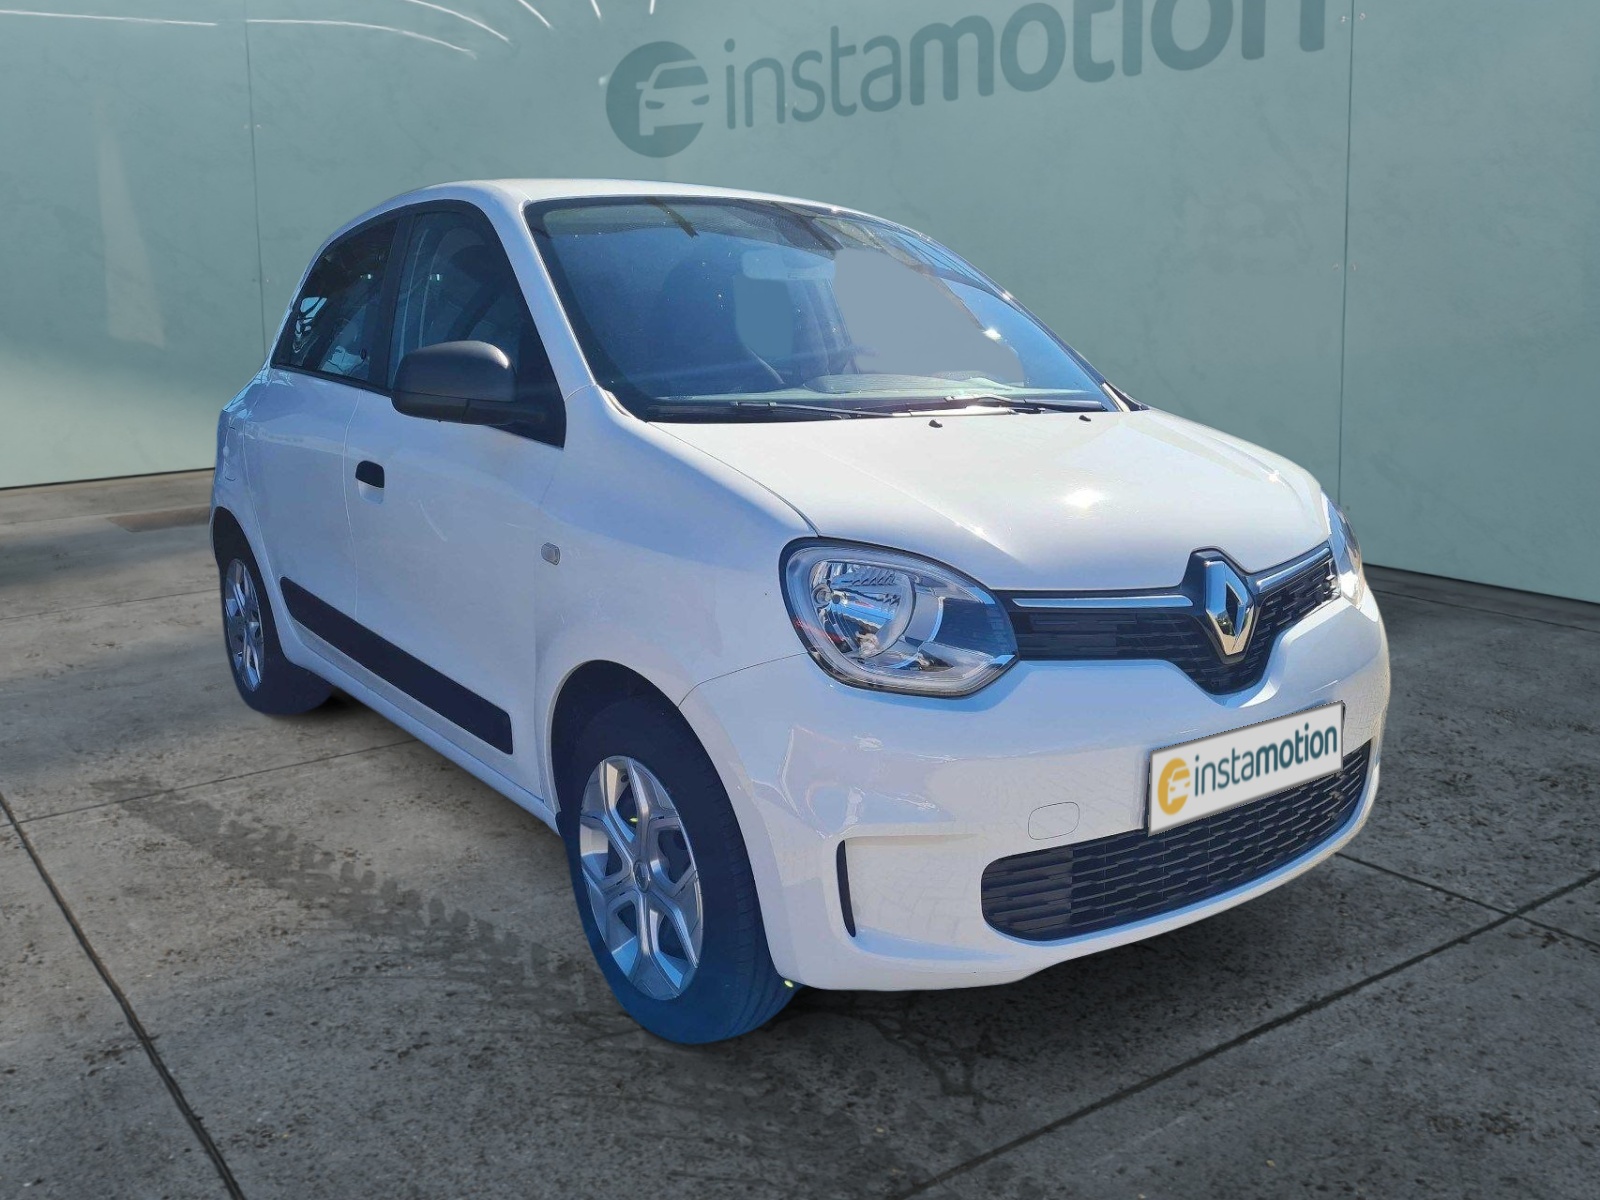 Renault Twingo 1.0 l SCe 65 Intens LM15 Easy-Link